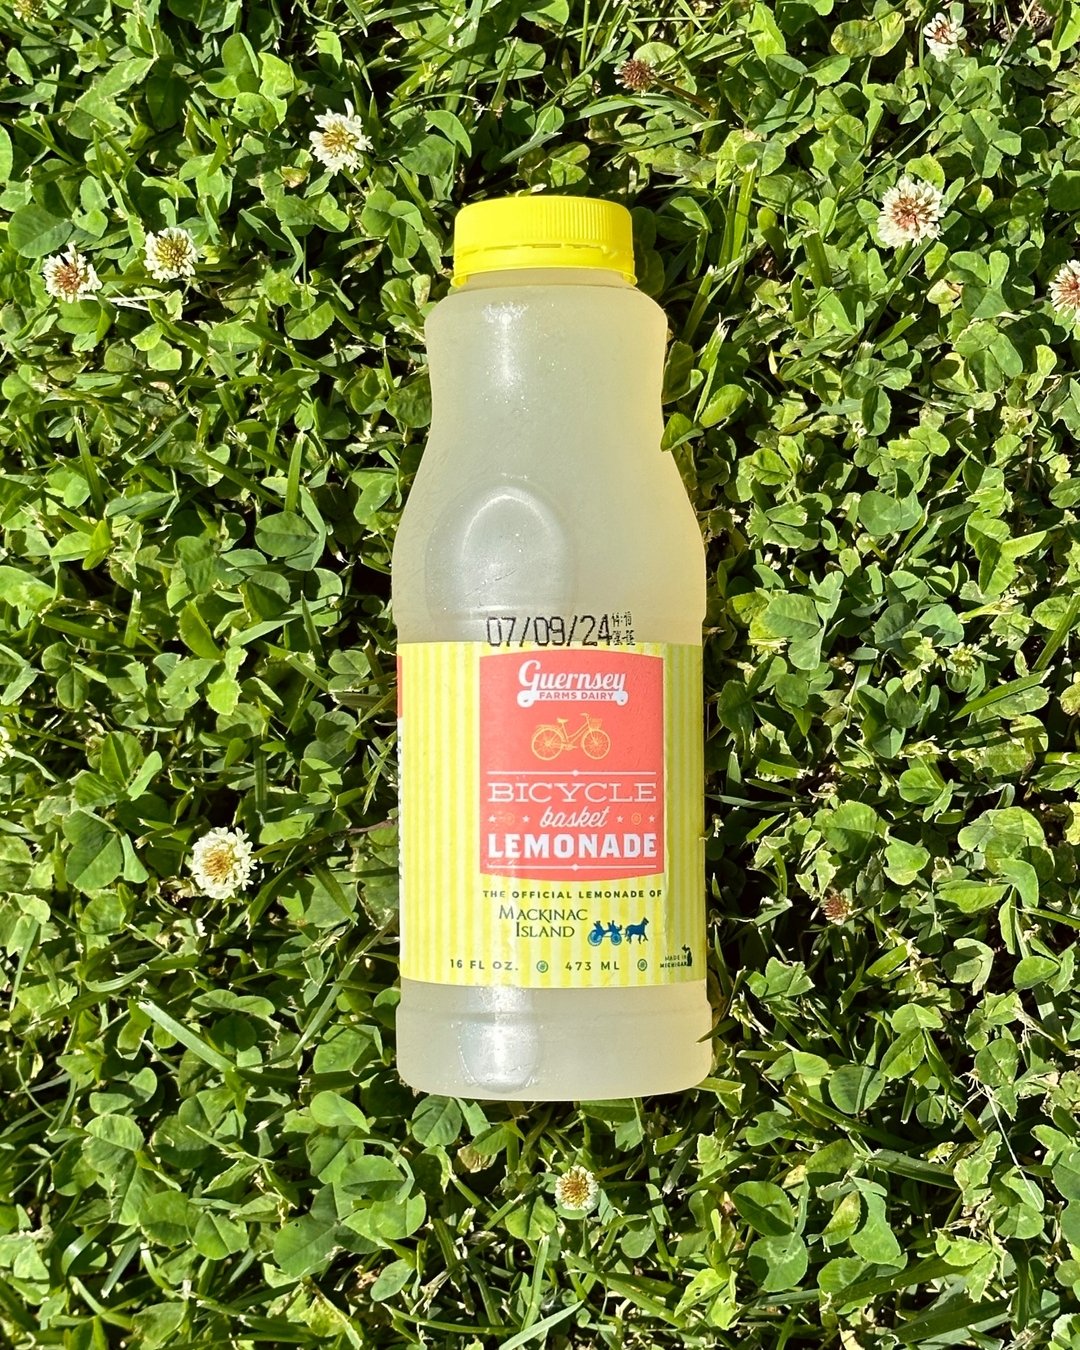 Hi friend 🍋 We&rsquo;ve got lemonade bottles in our grab n go fridge! Full lemonade menu will start soon 🤤 But for now, the bottles will tide ya over 💗 We&rsquo;re open today 7-5, see ya later! 🥰 #driftercoffee